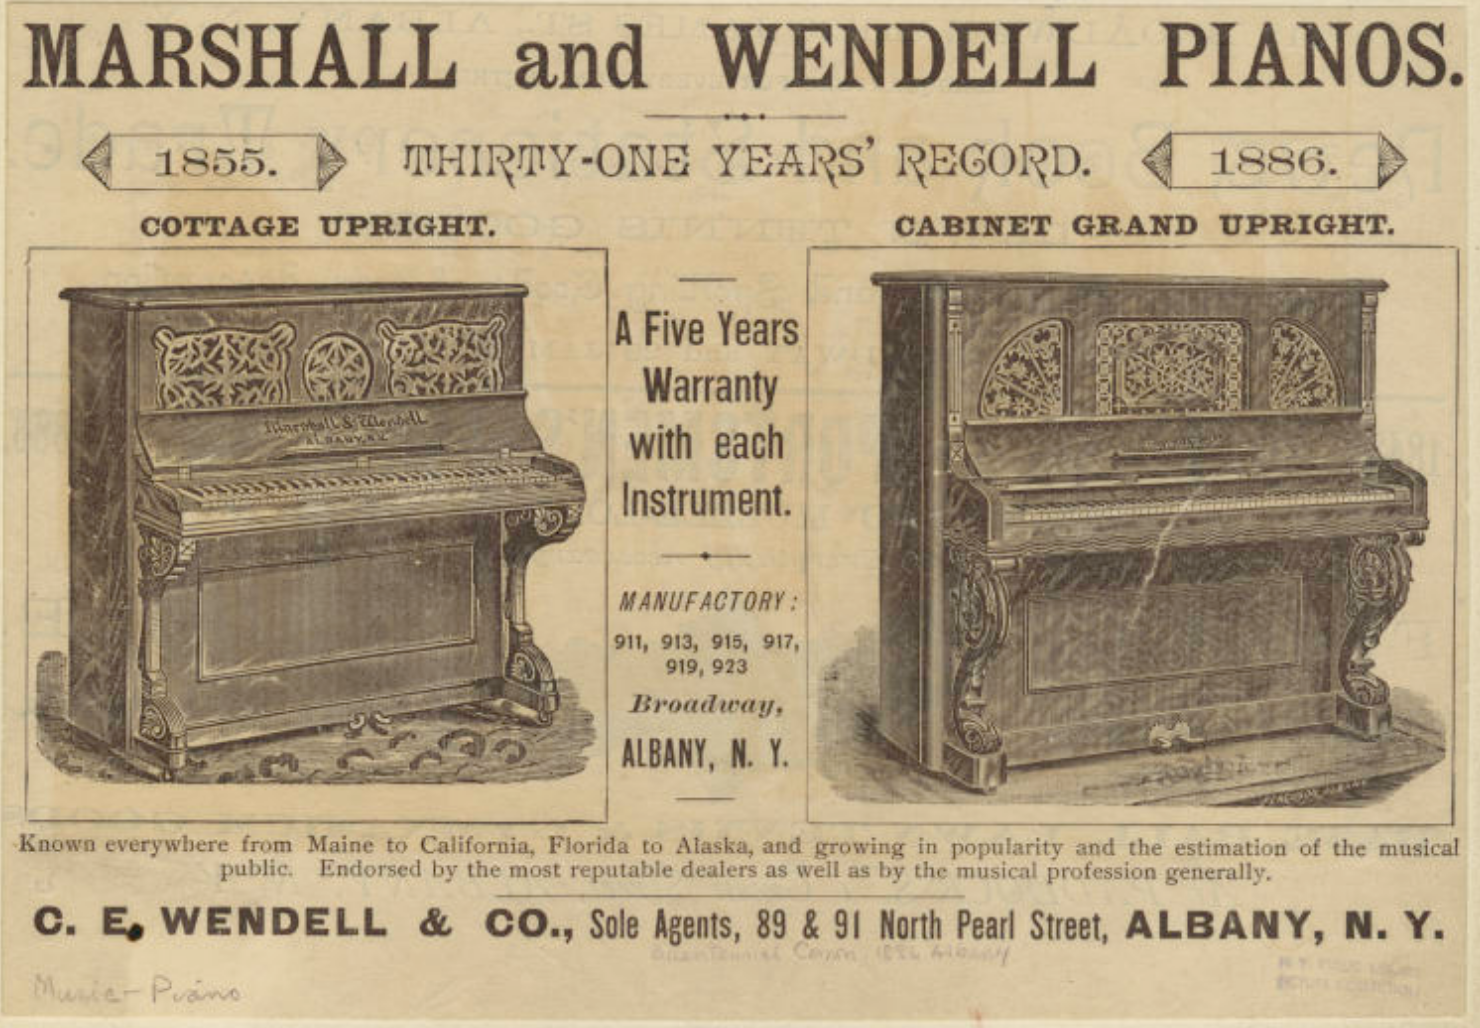 Marshall and Wendell Pianos 1886 ad